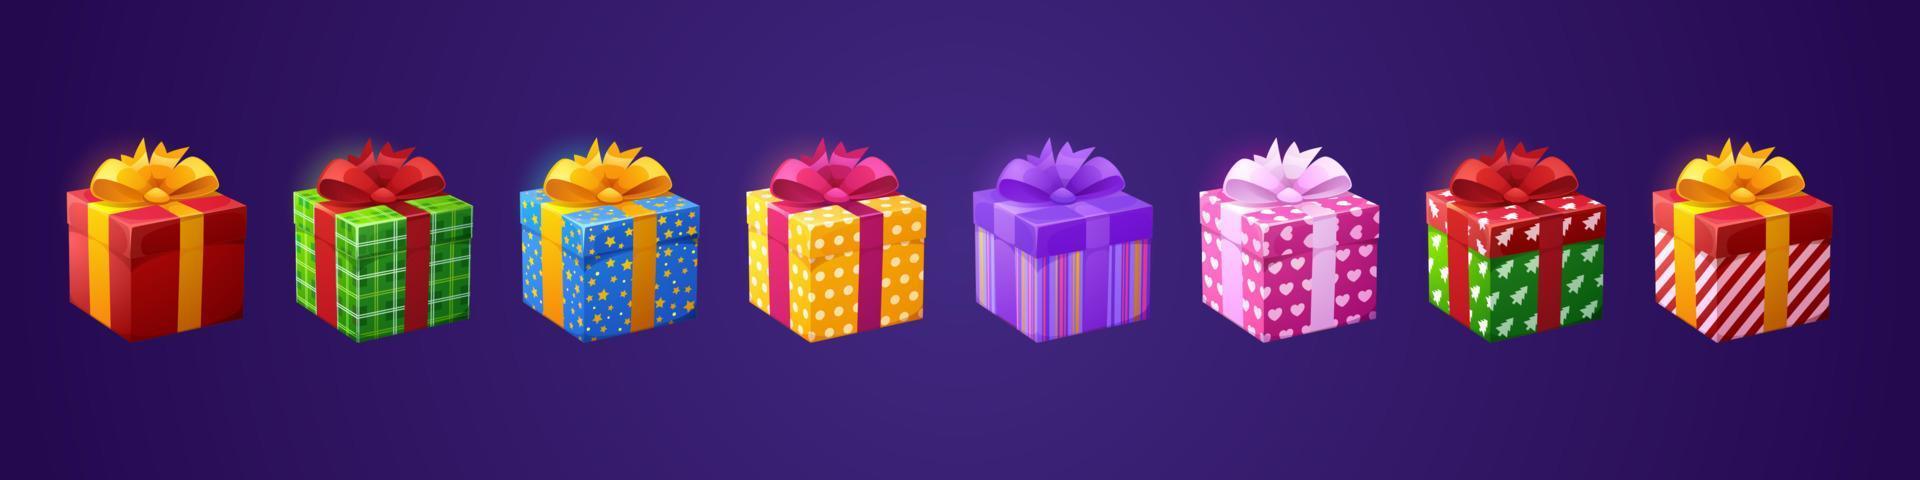 Gift boxes 3d birthday presents in paper and bows vector